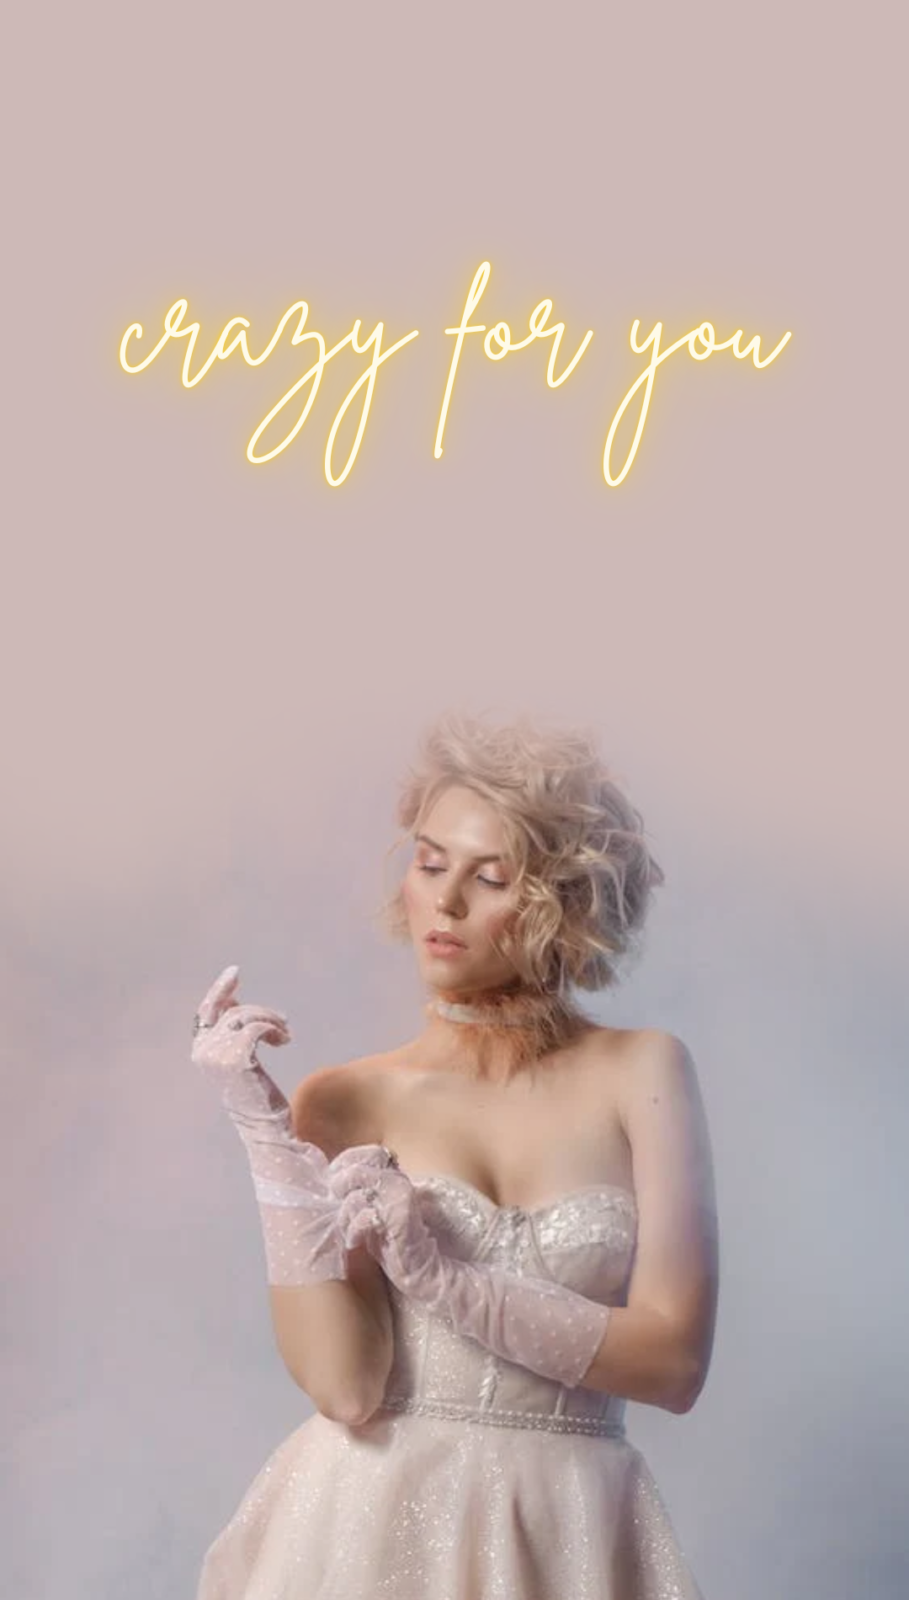 Neon sign ideas for a retro wedding - image shows young woman dressed in a trendy 80s Madonna inspired wedding dress, with sheer white polka dot gloves to match. There is a warm white neon sign mockup above the woman's head reading 'crazy for you' in a script font.